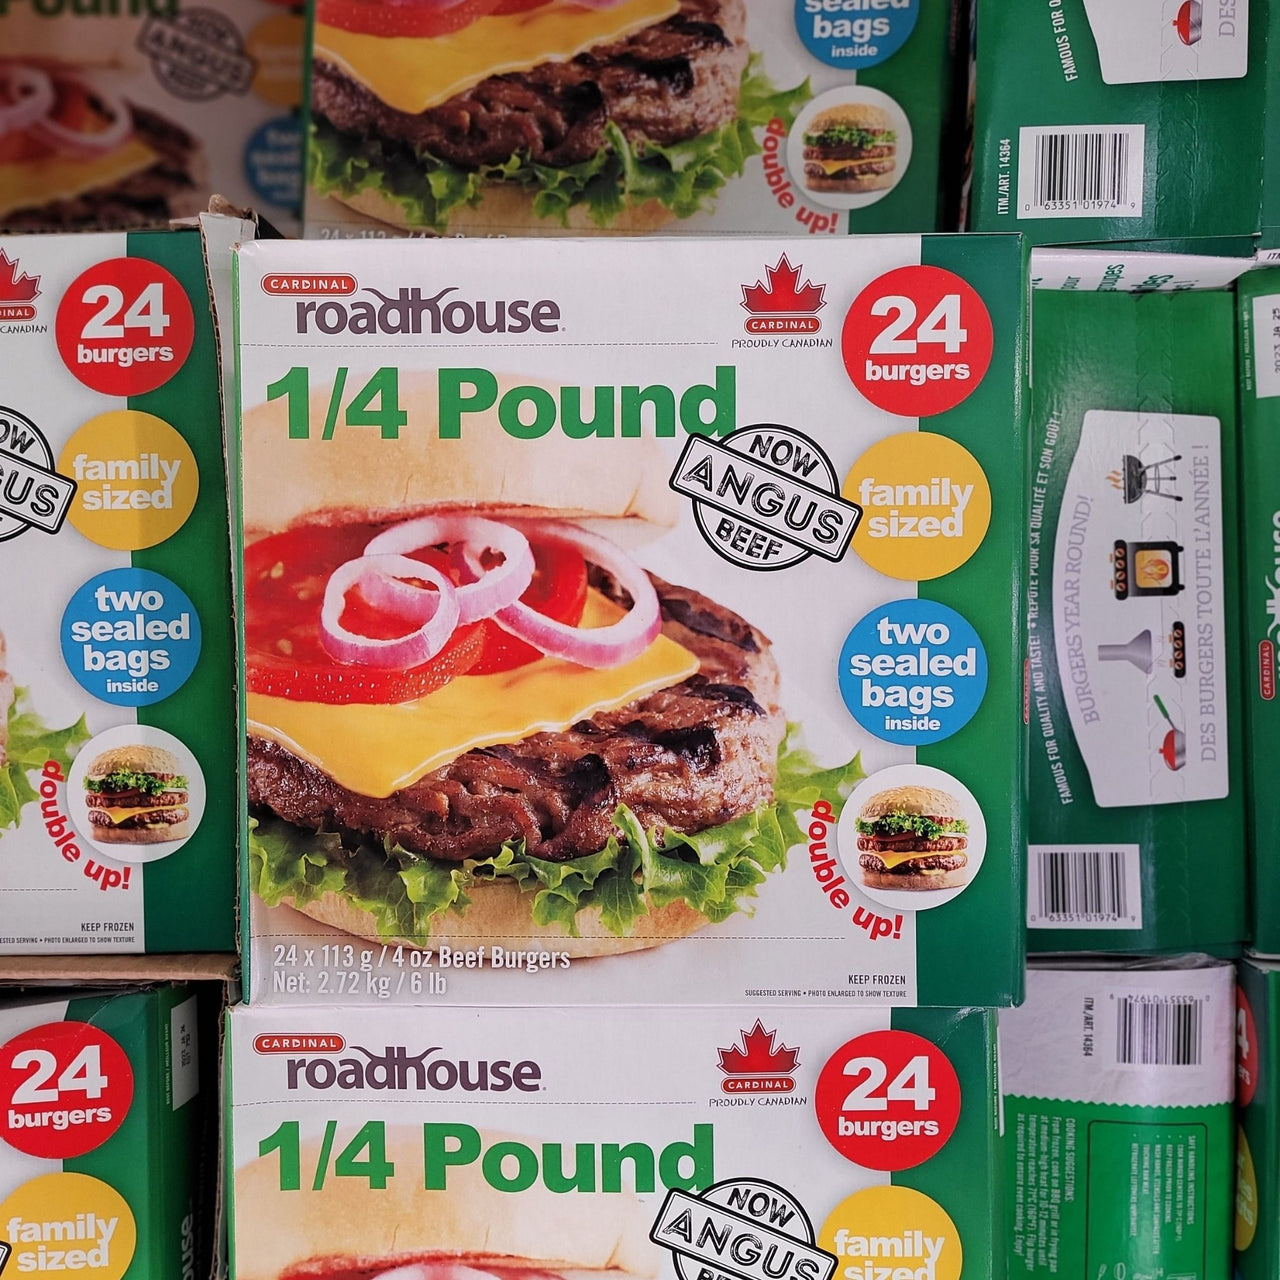 Image of Cardinal Roadhouse 1/4 Pound Angus Beef Burgers